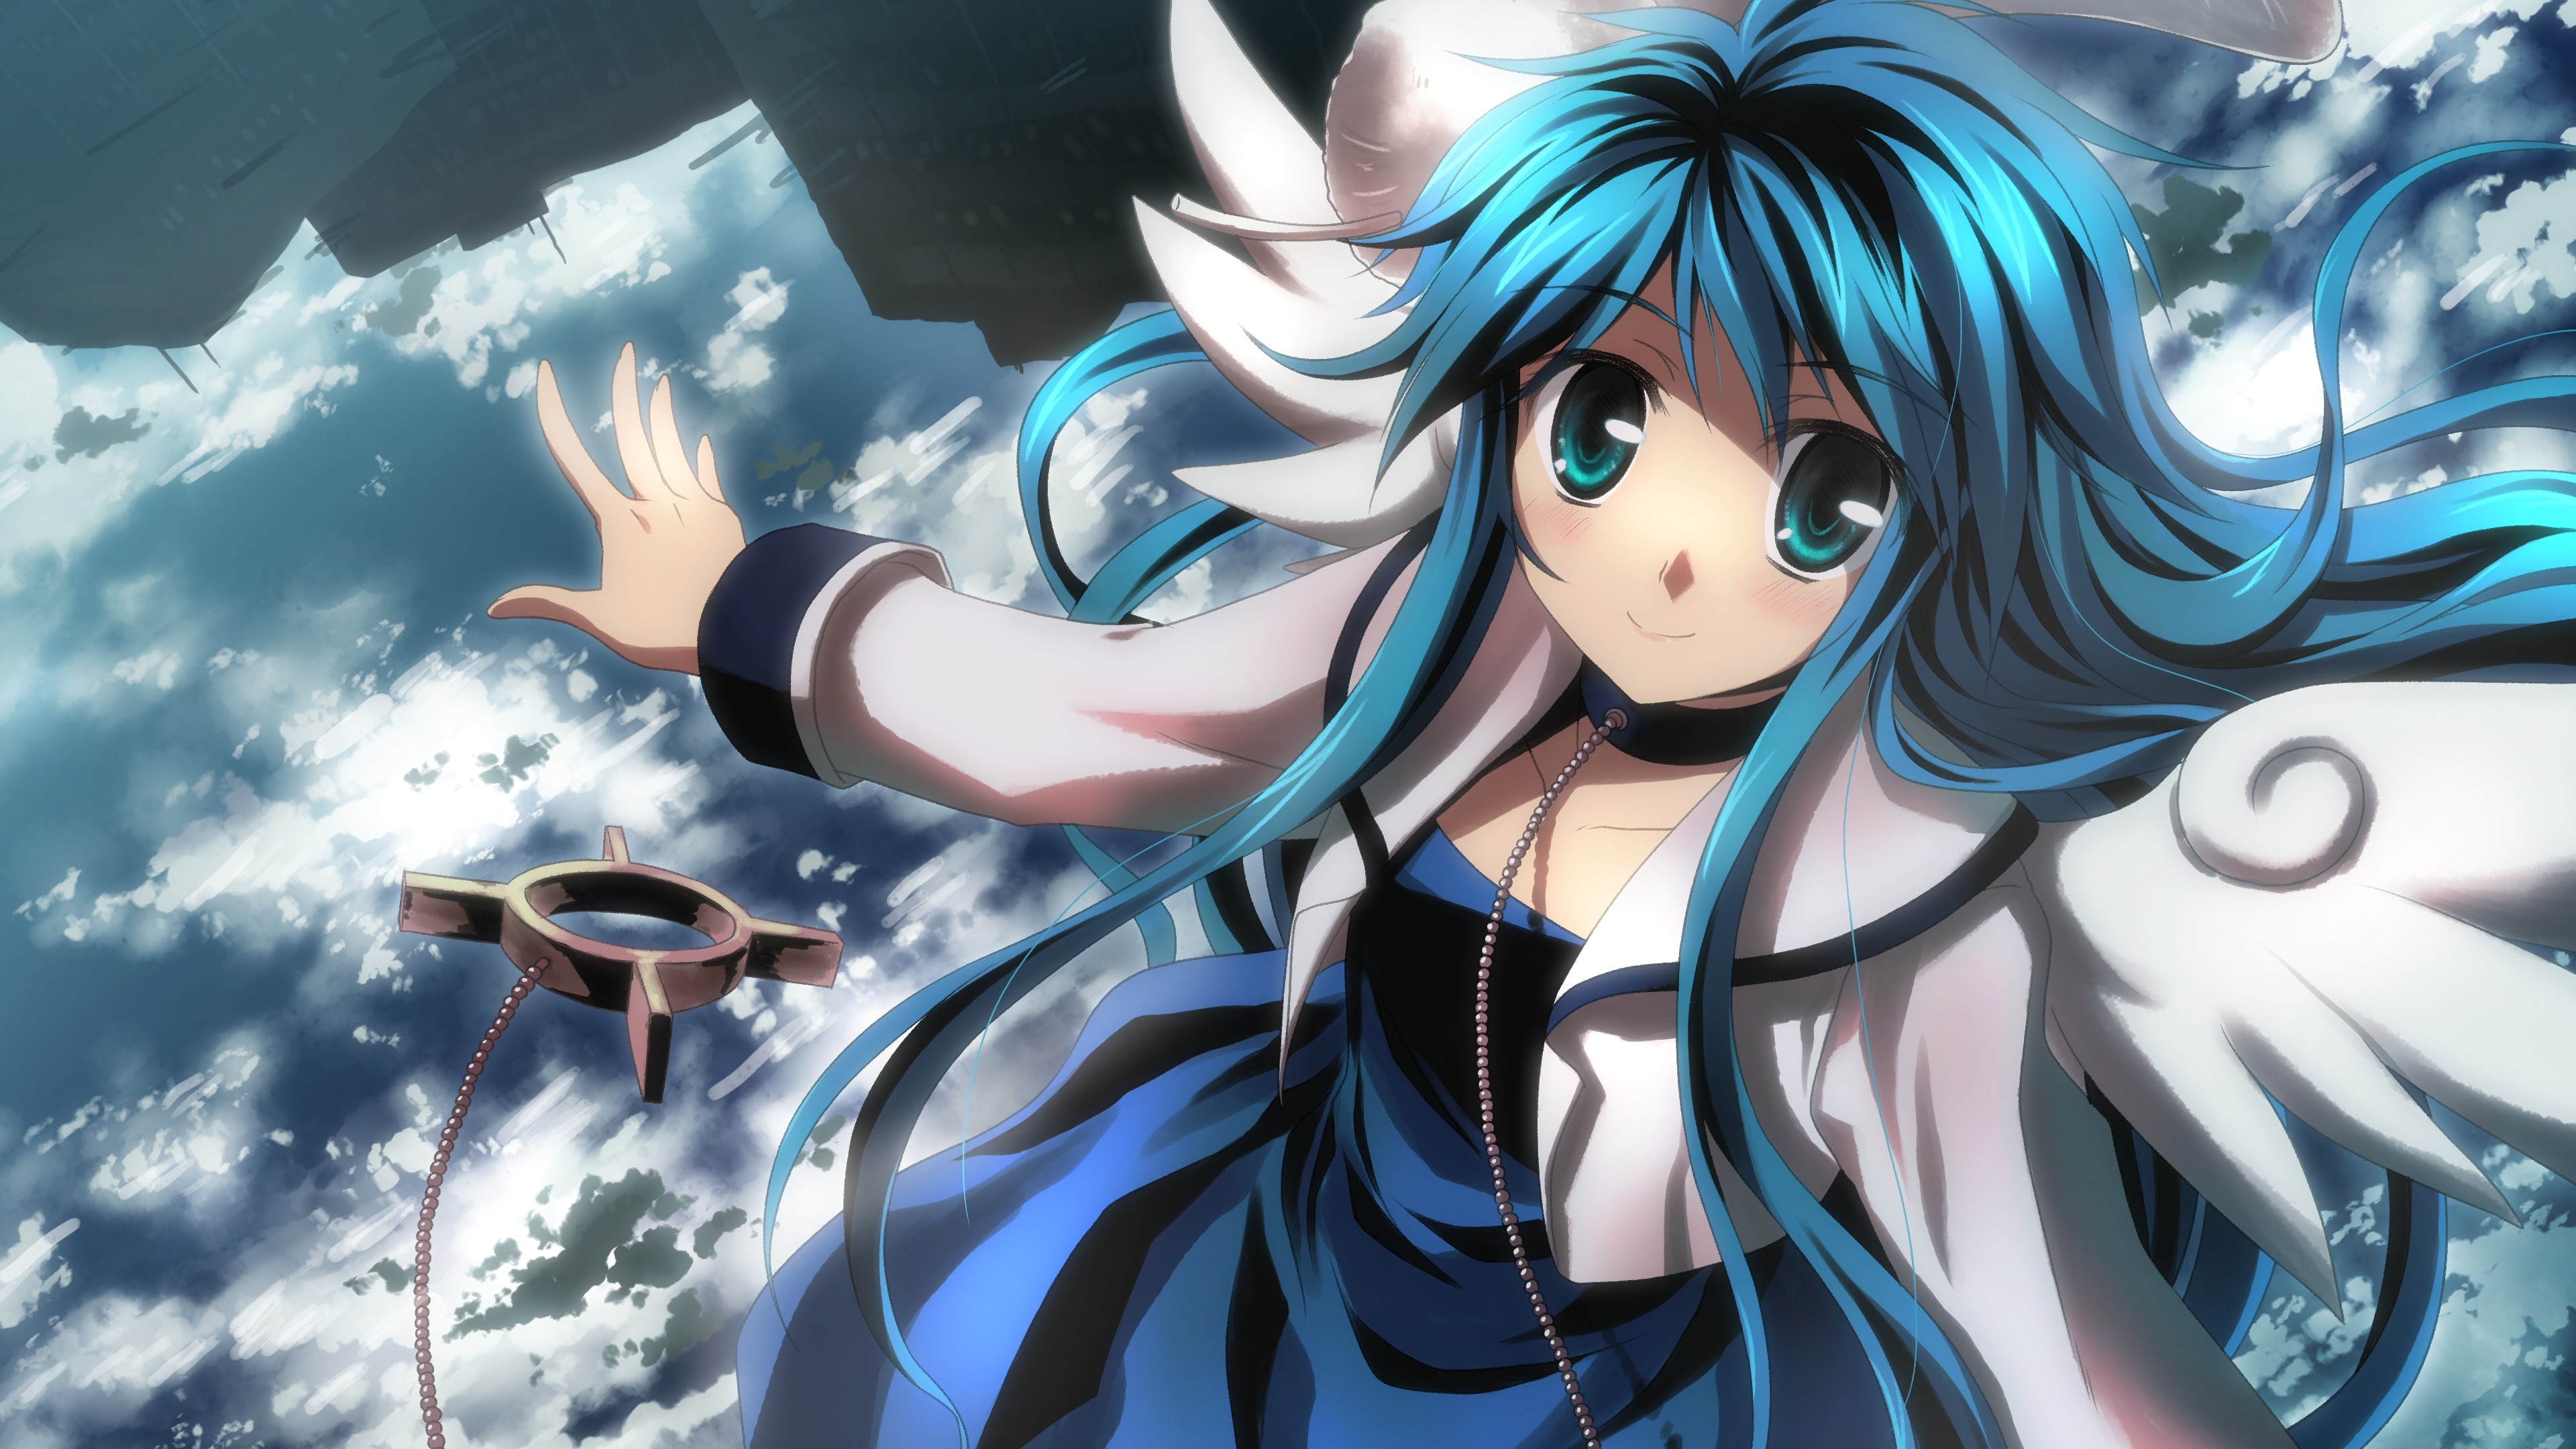 Wallpaper Blue hair and eyes anime girl, smile, sky 3840x2160 UHD 4K Picture, Image